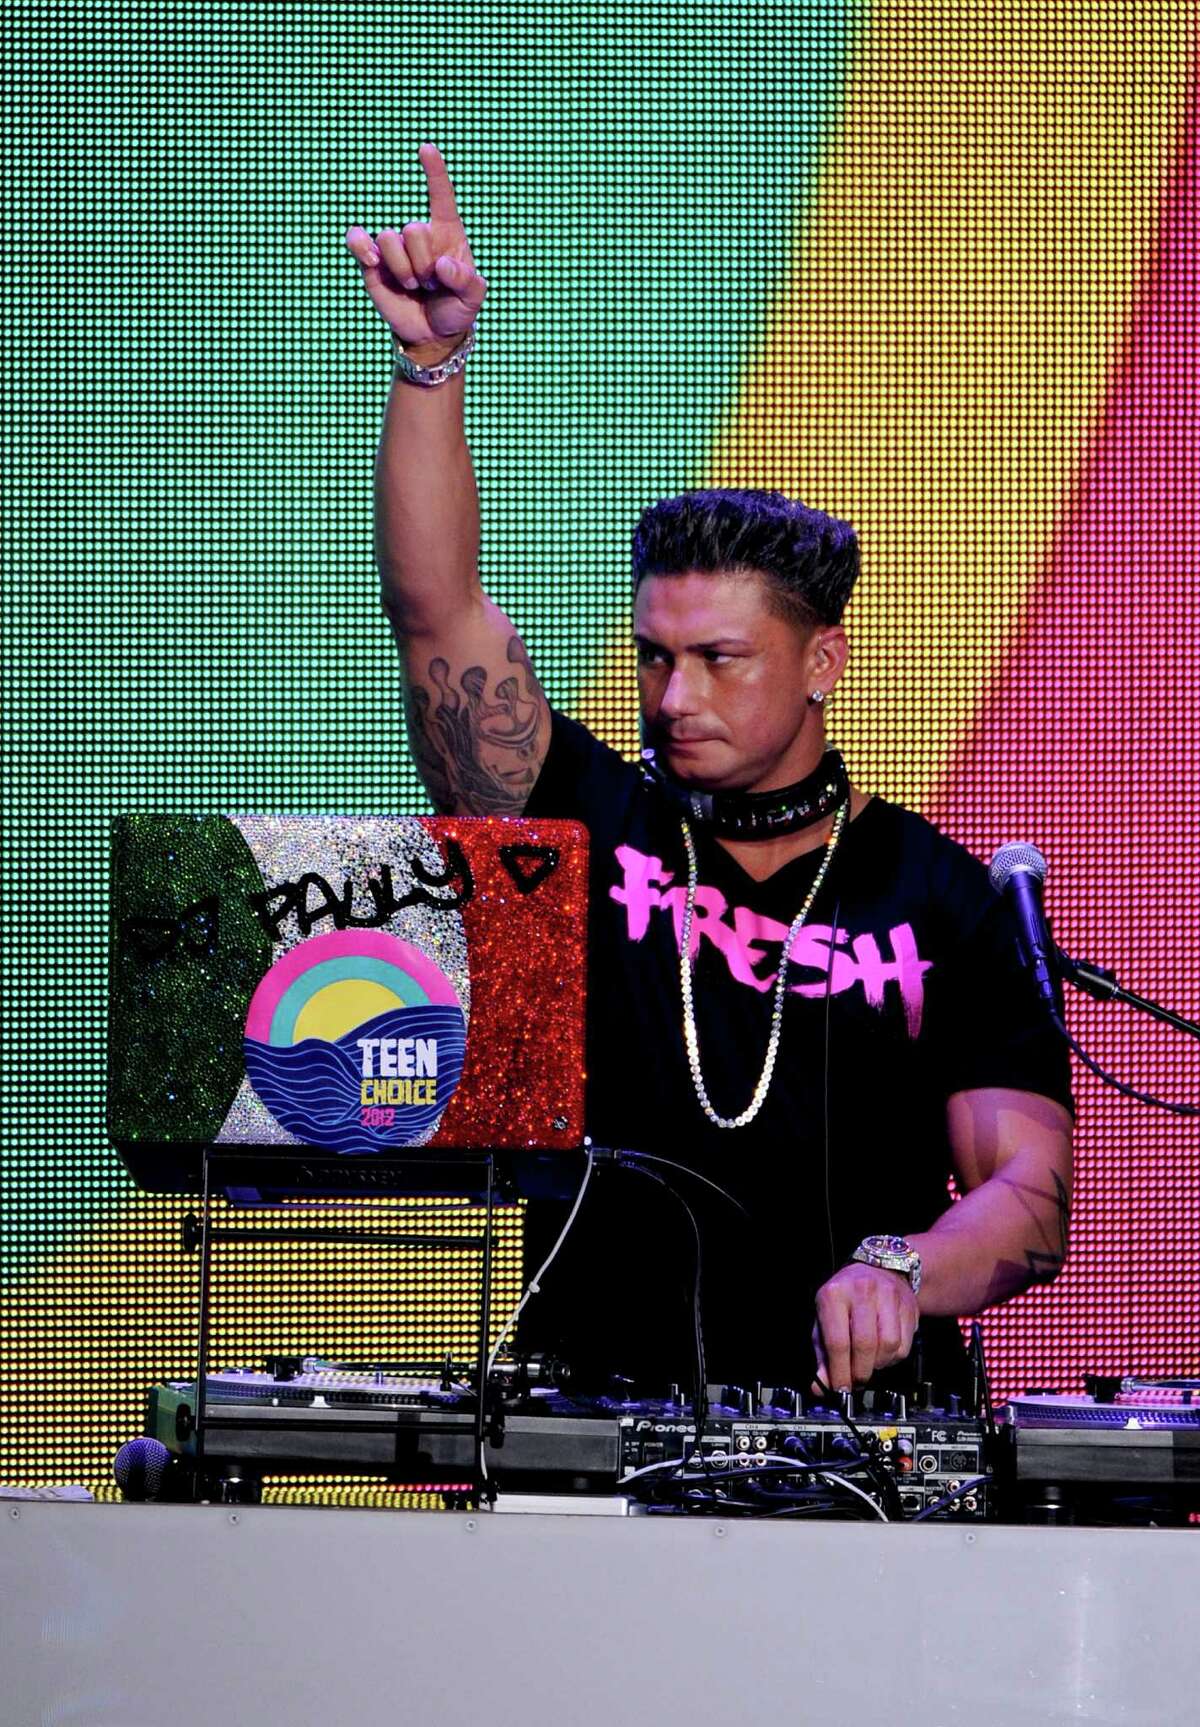 UNIVERSAL CITY, CA - JULY 22: DJ Pauly D spins onstage during the 2012 Teen Choice Awards at Gibson Amphitheatre on July 22, 2012 in Universal City, California.